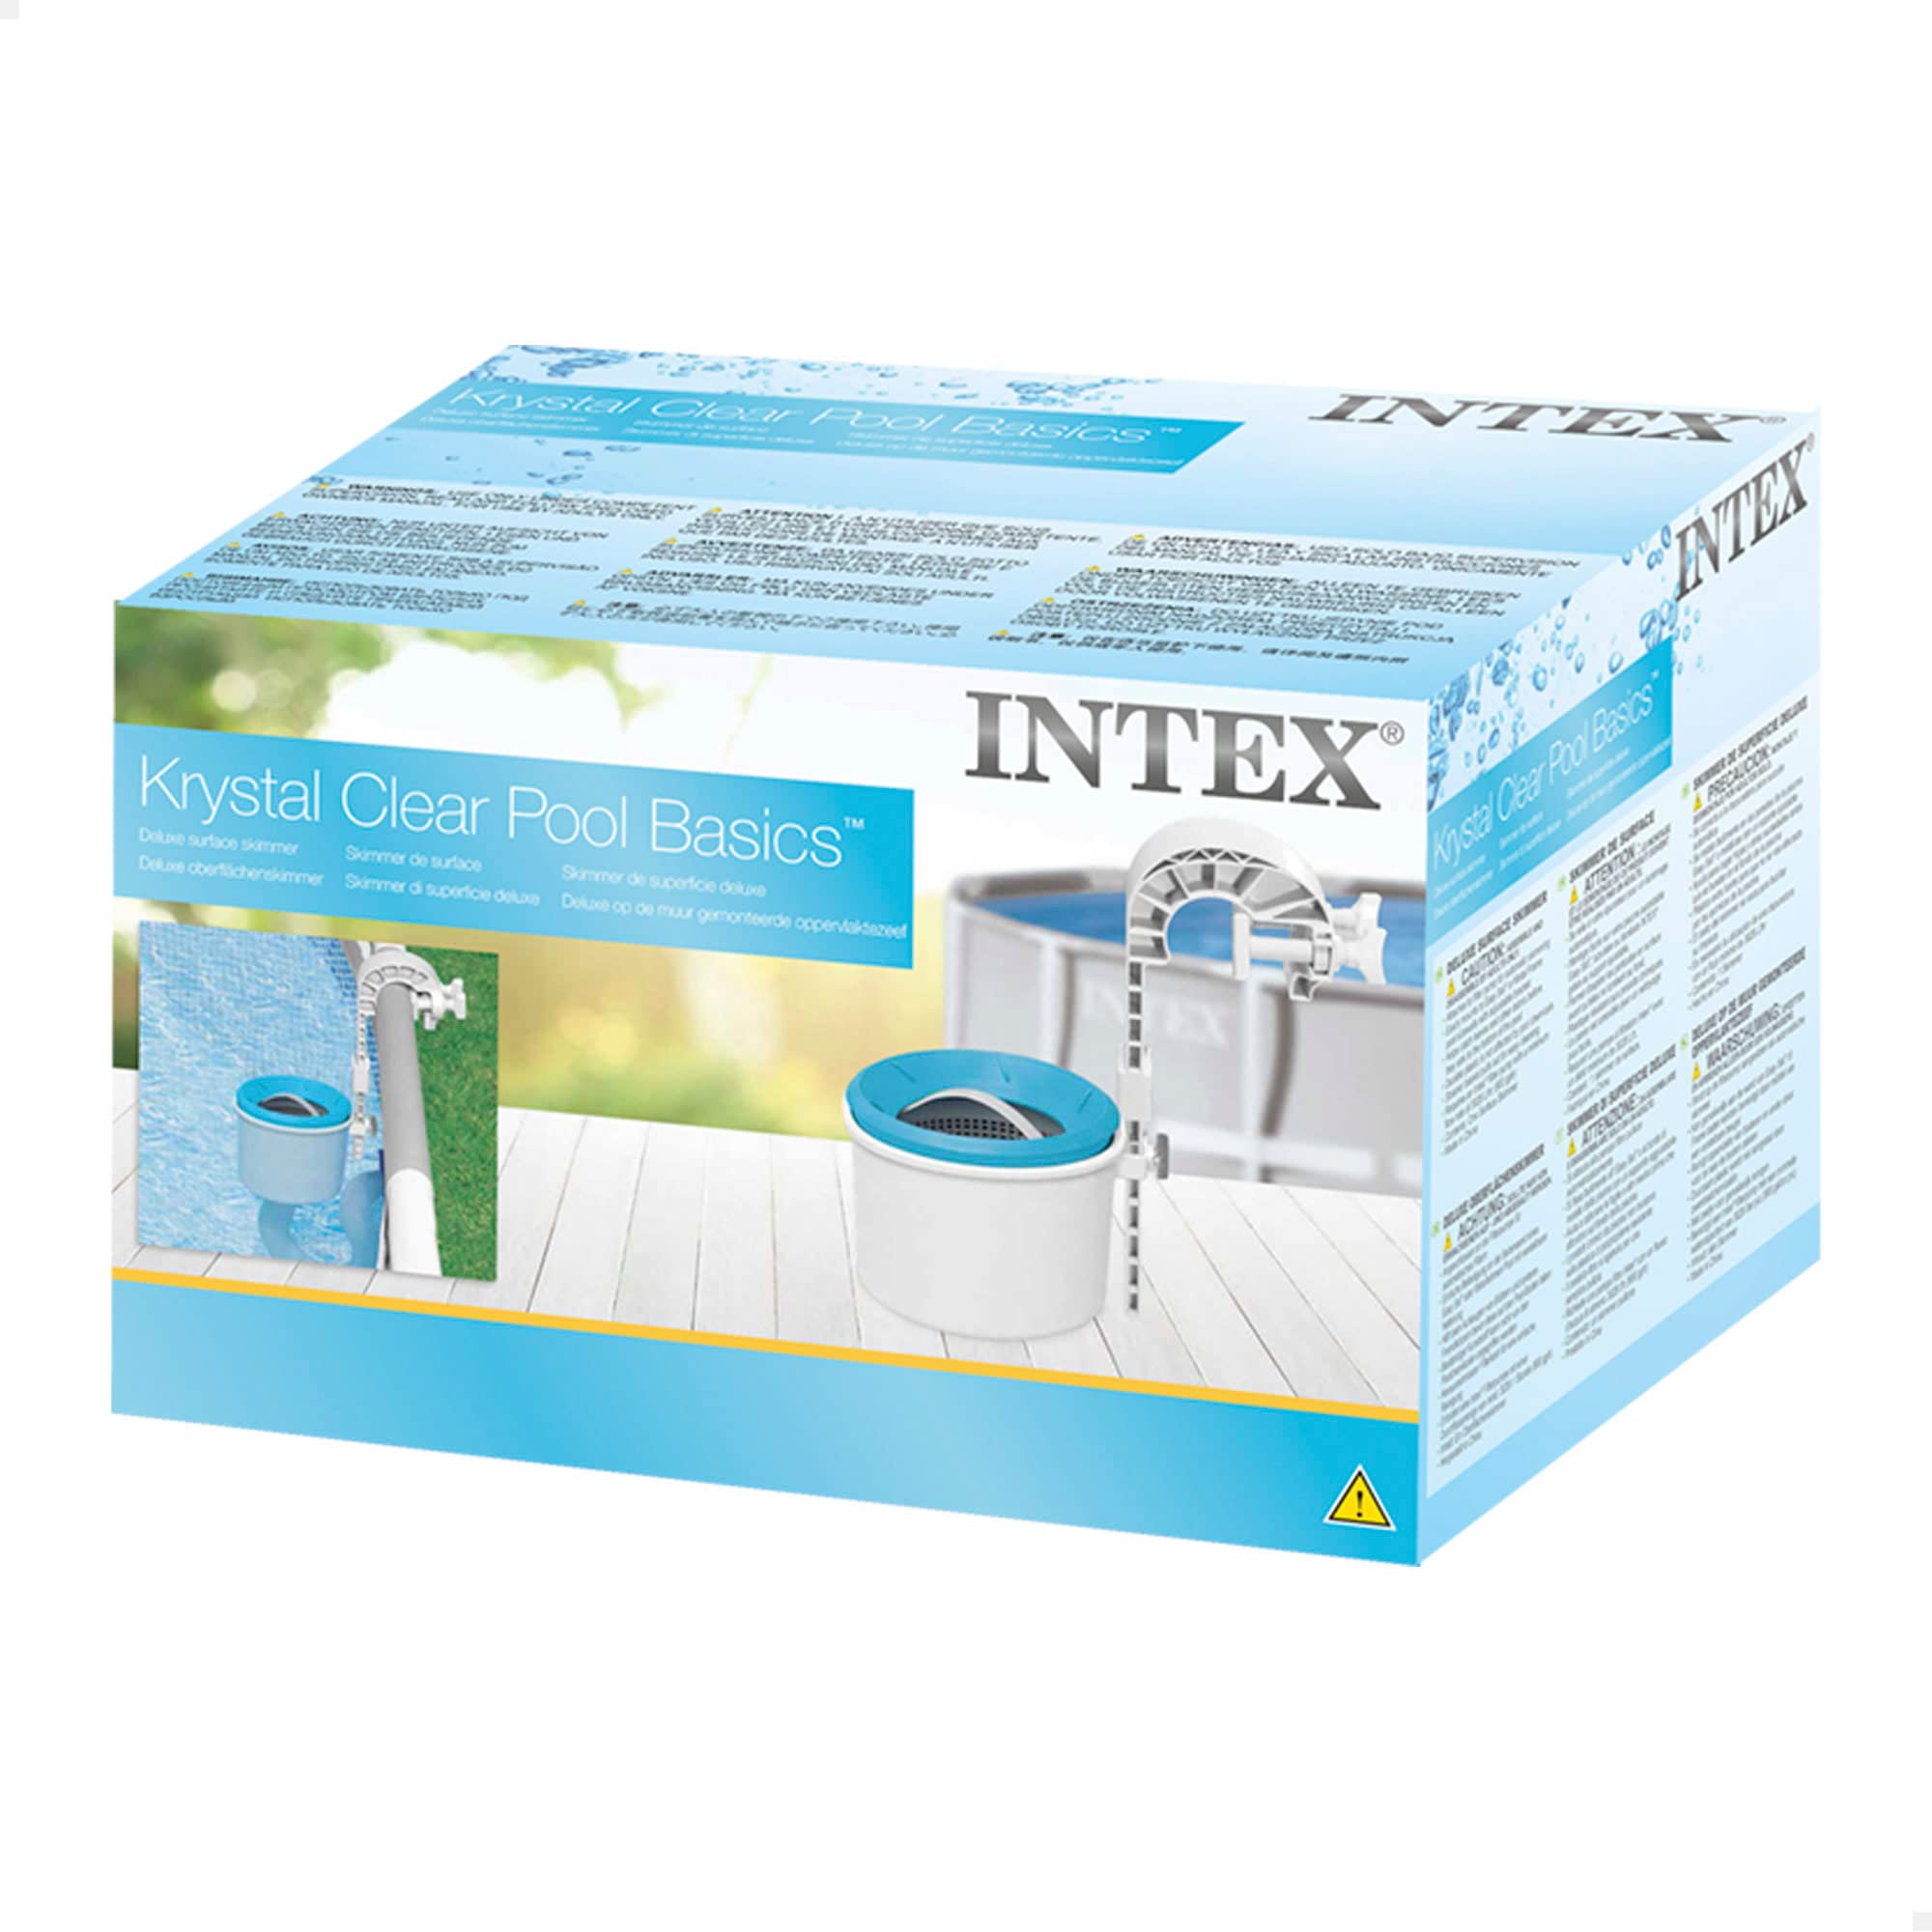 Intex Deluxe Wall Mount Surface Skimmer